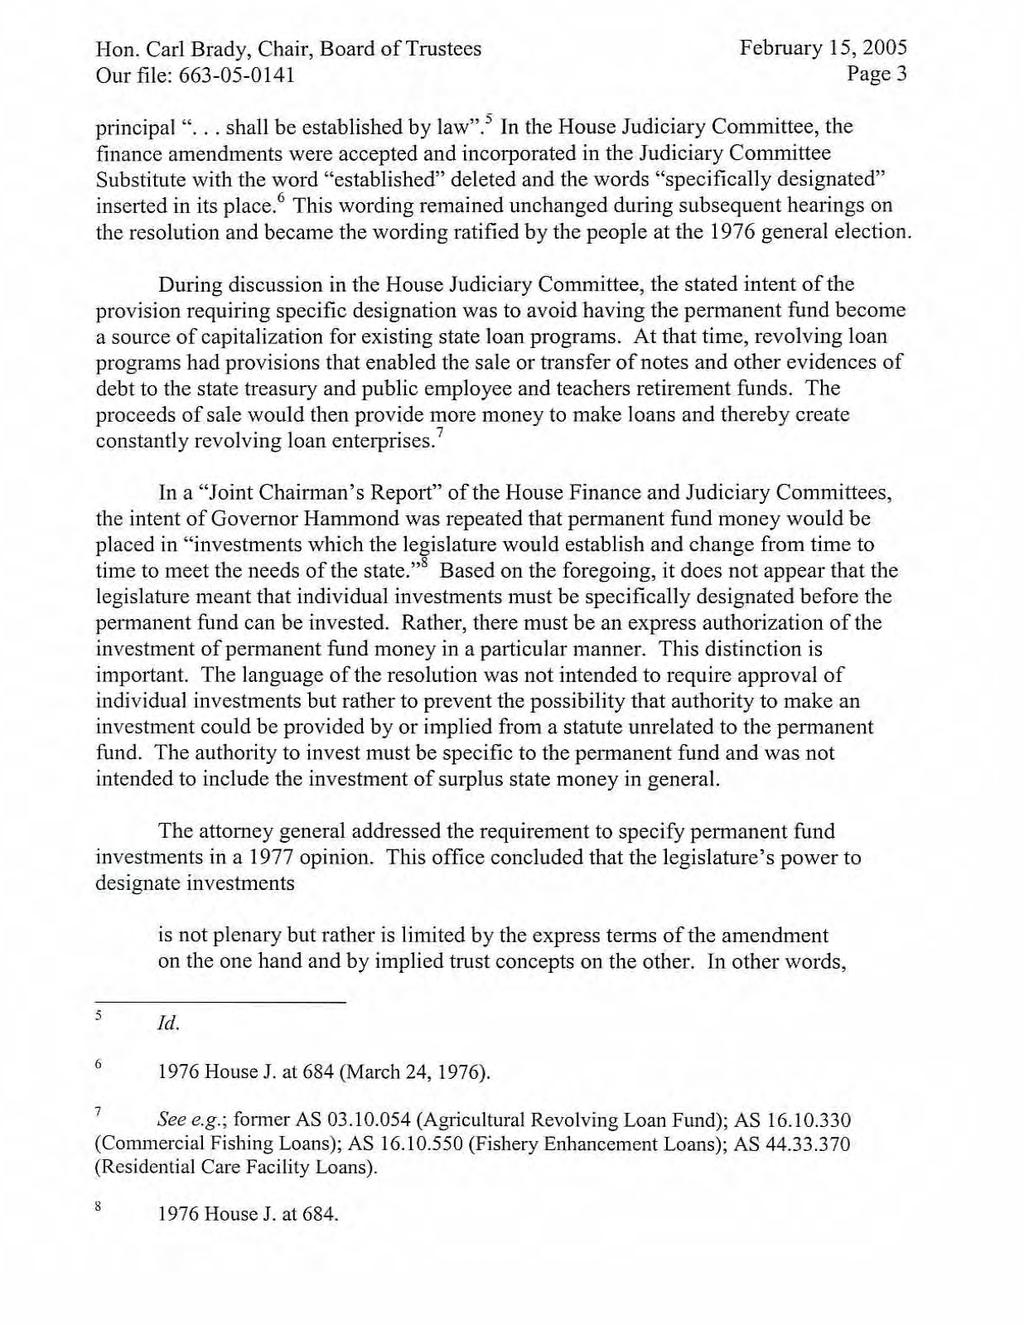 Hon. Carl Brady, Chair, Board of Trustees February 15,2005 Our file: 663-05-0141 Page 3 prineipal "... shall be established by law".